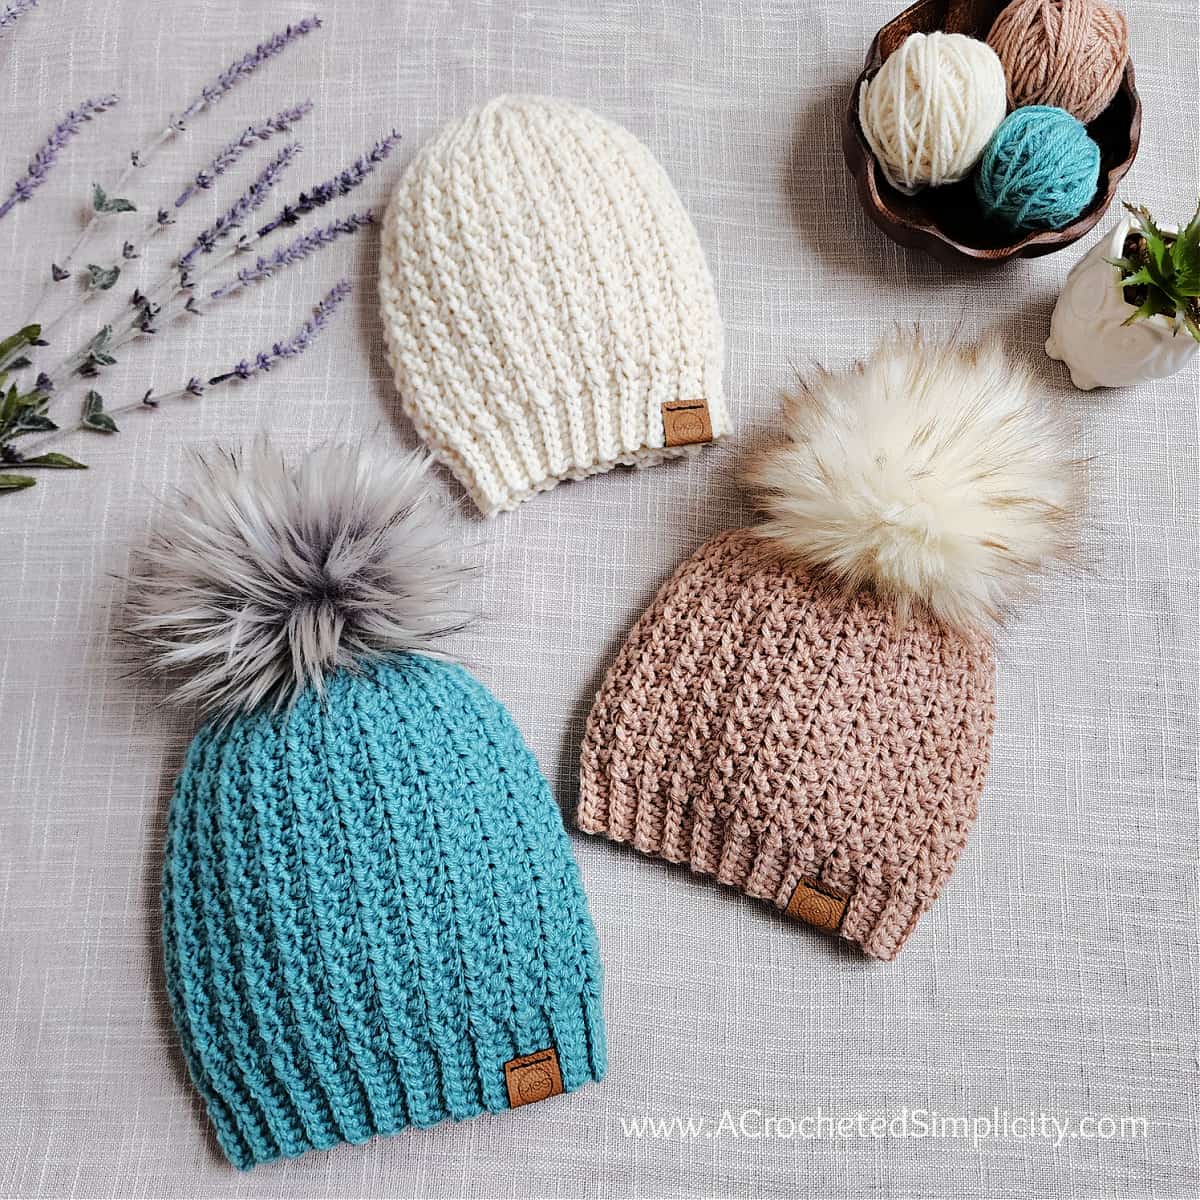 Three short row crochet hats laying with lavender and a yarn bowl.